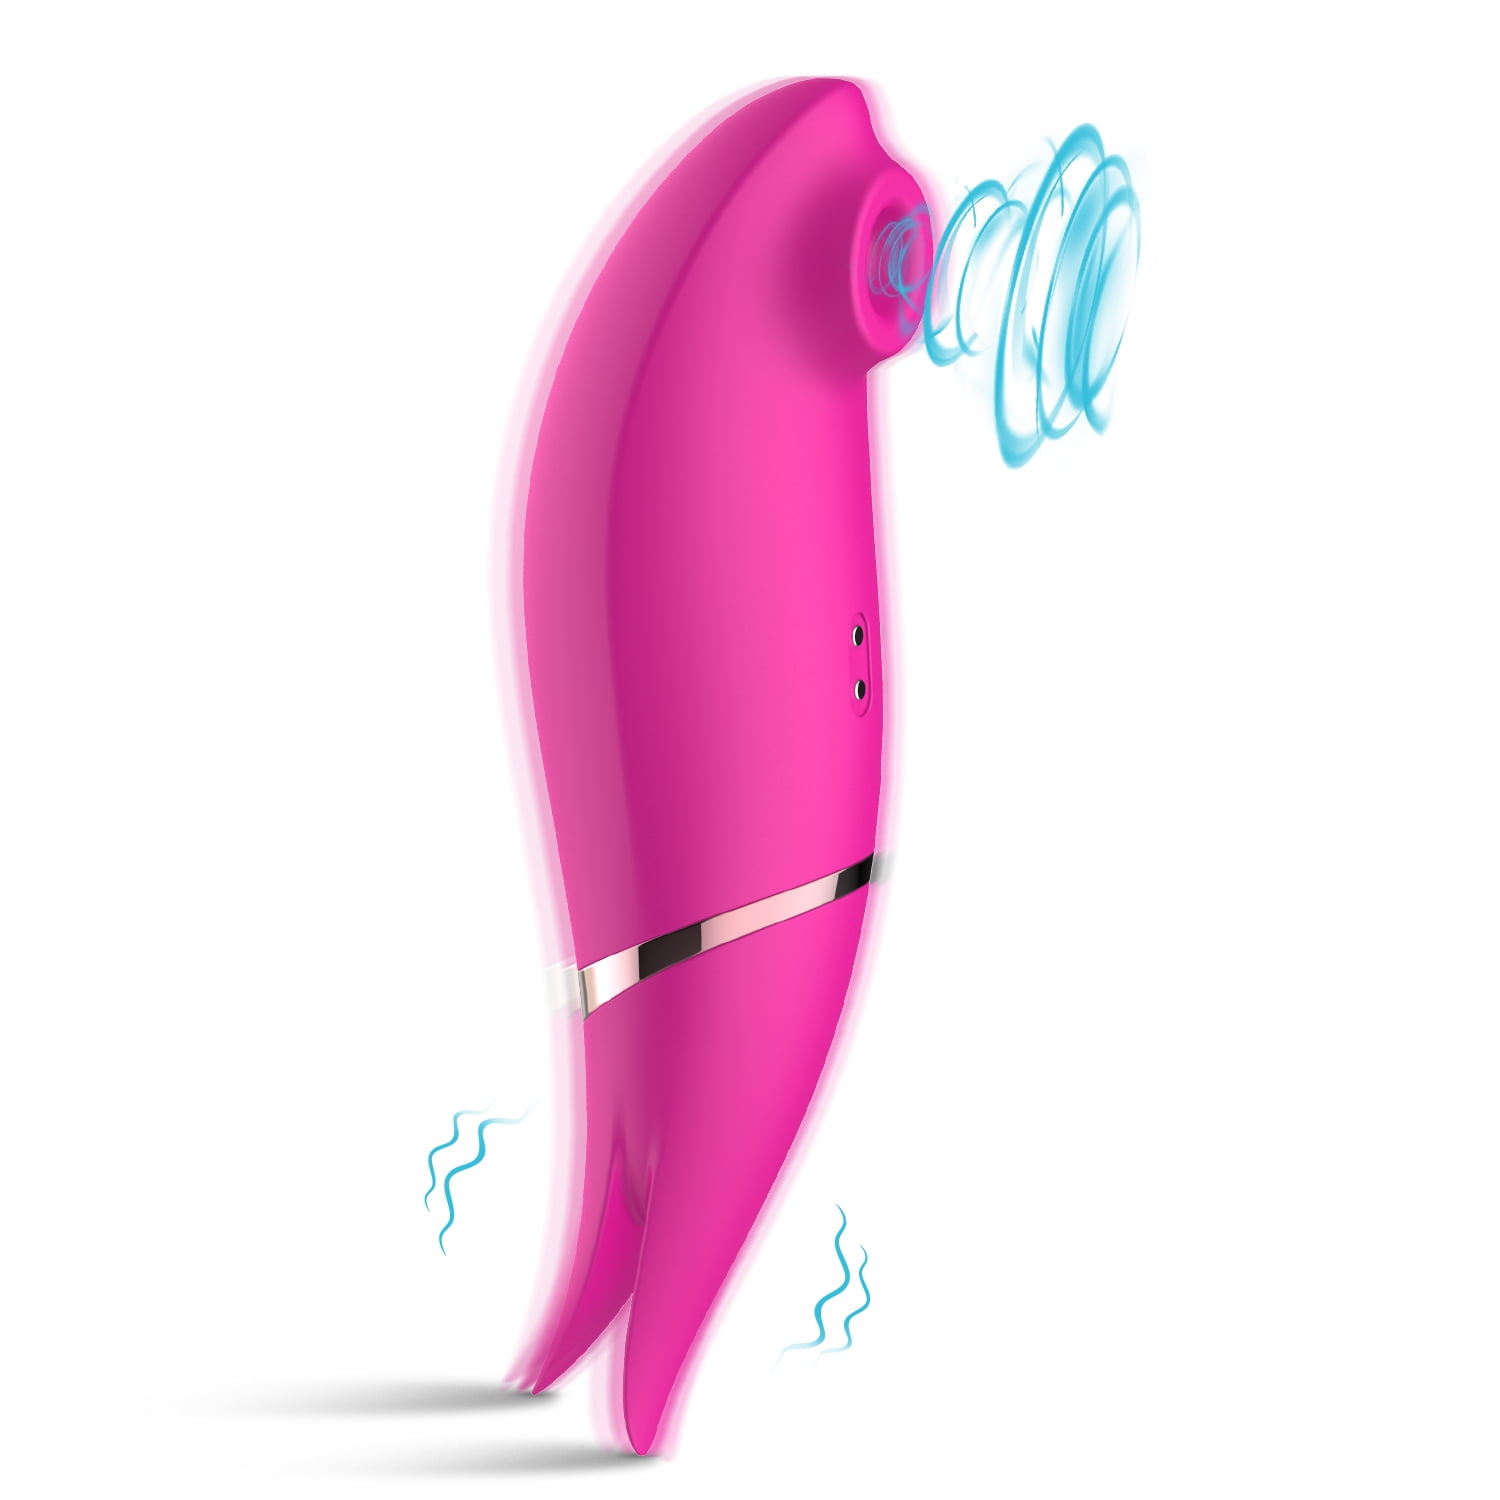 LormissCat Clitoris Sucking Vibrator for Women with 5 Suction and 8 Vibration Patterns, Adult Sex Toys for Solo Masturbation and Couple Play pic pic